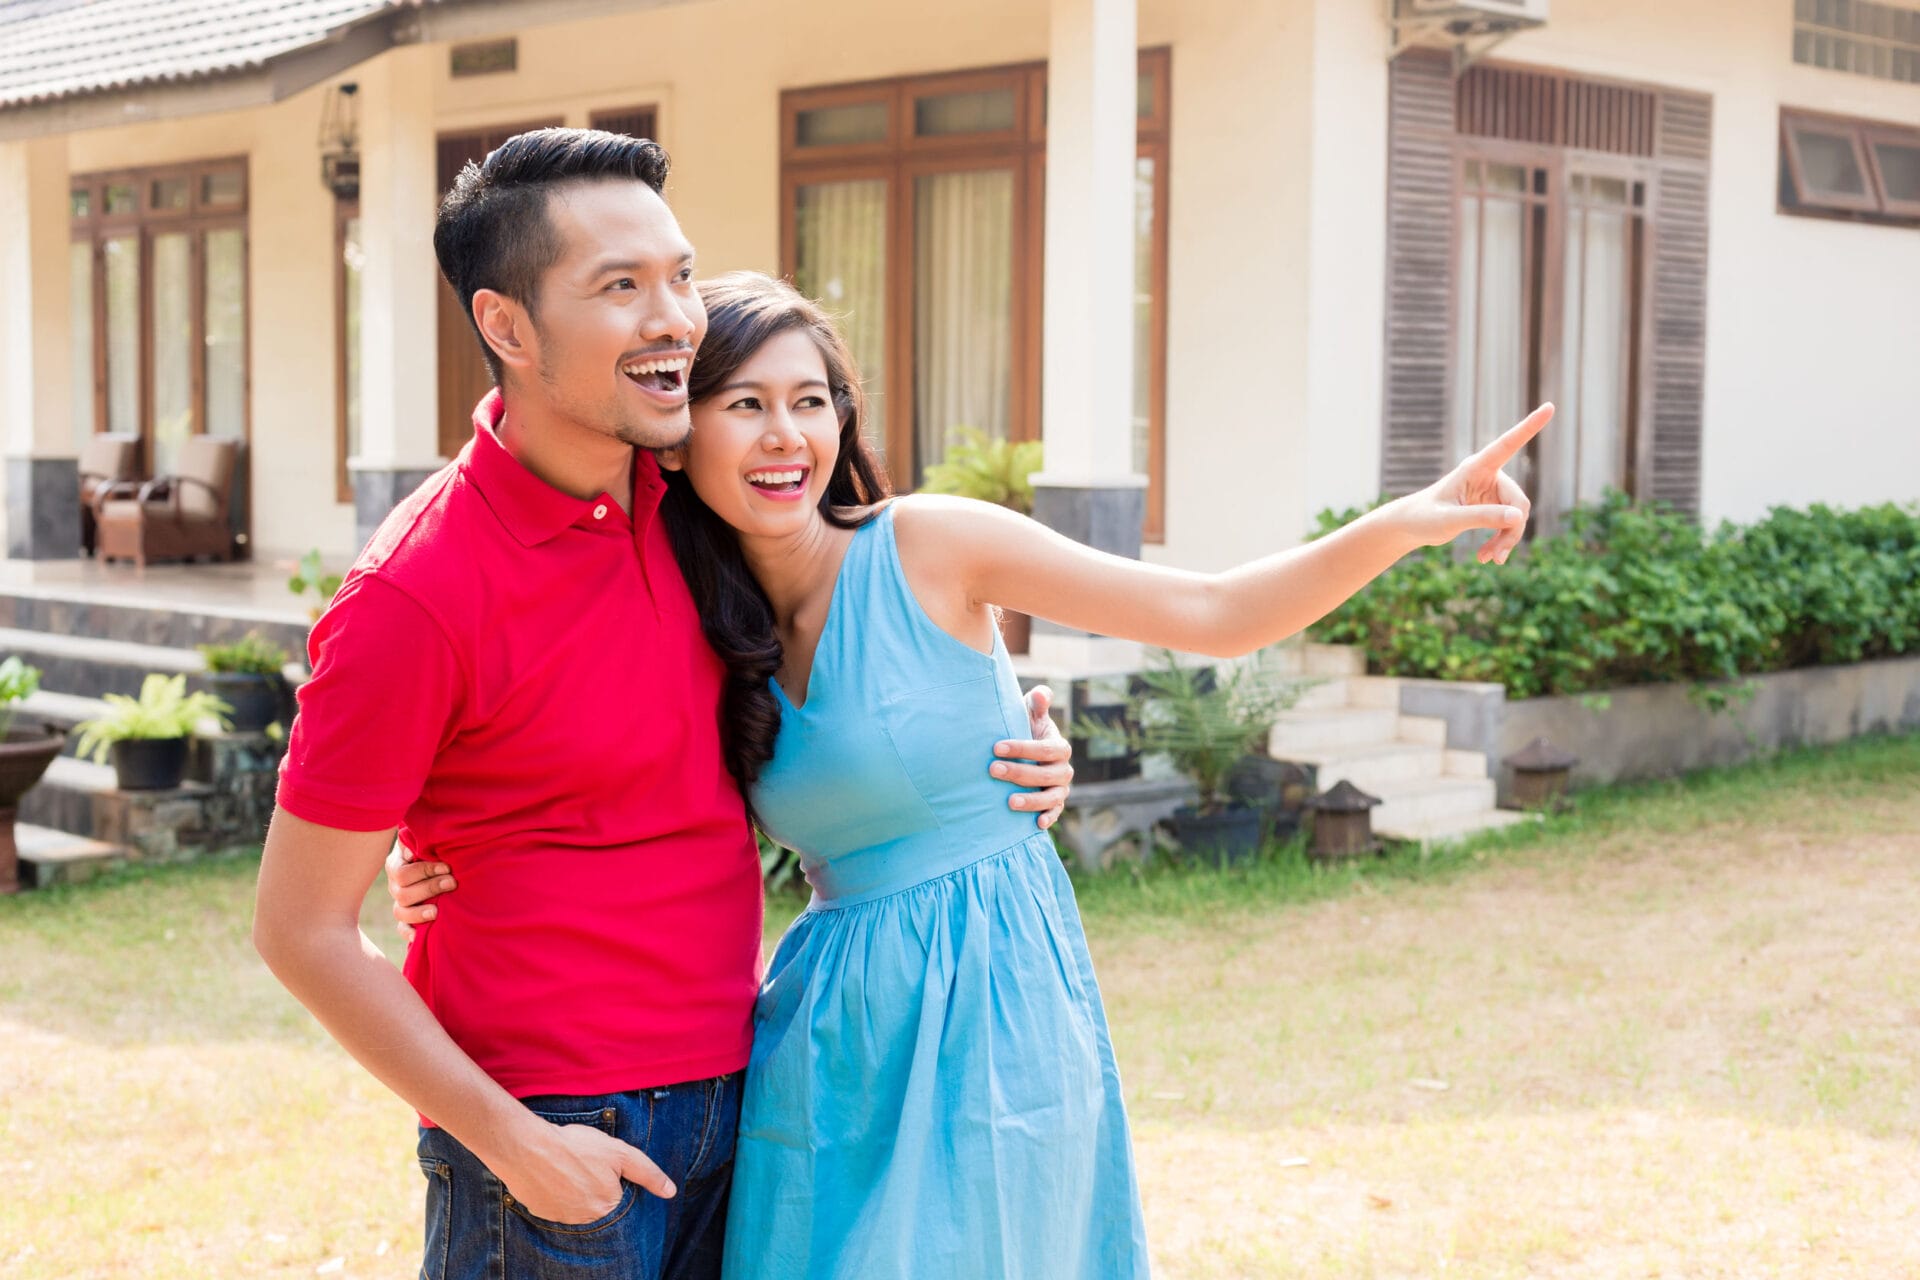 Cheerful young couple looking in the same direction in front of house